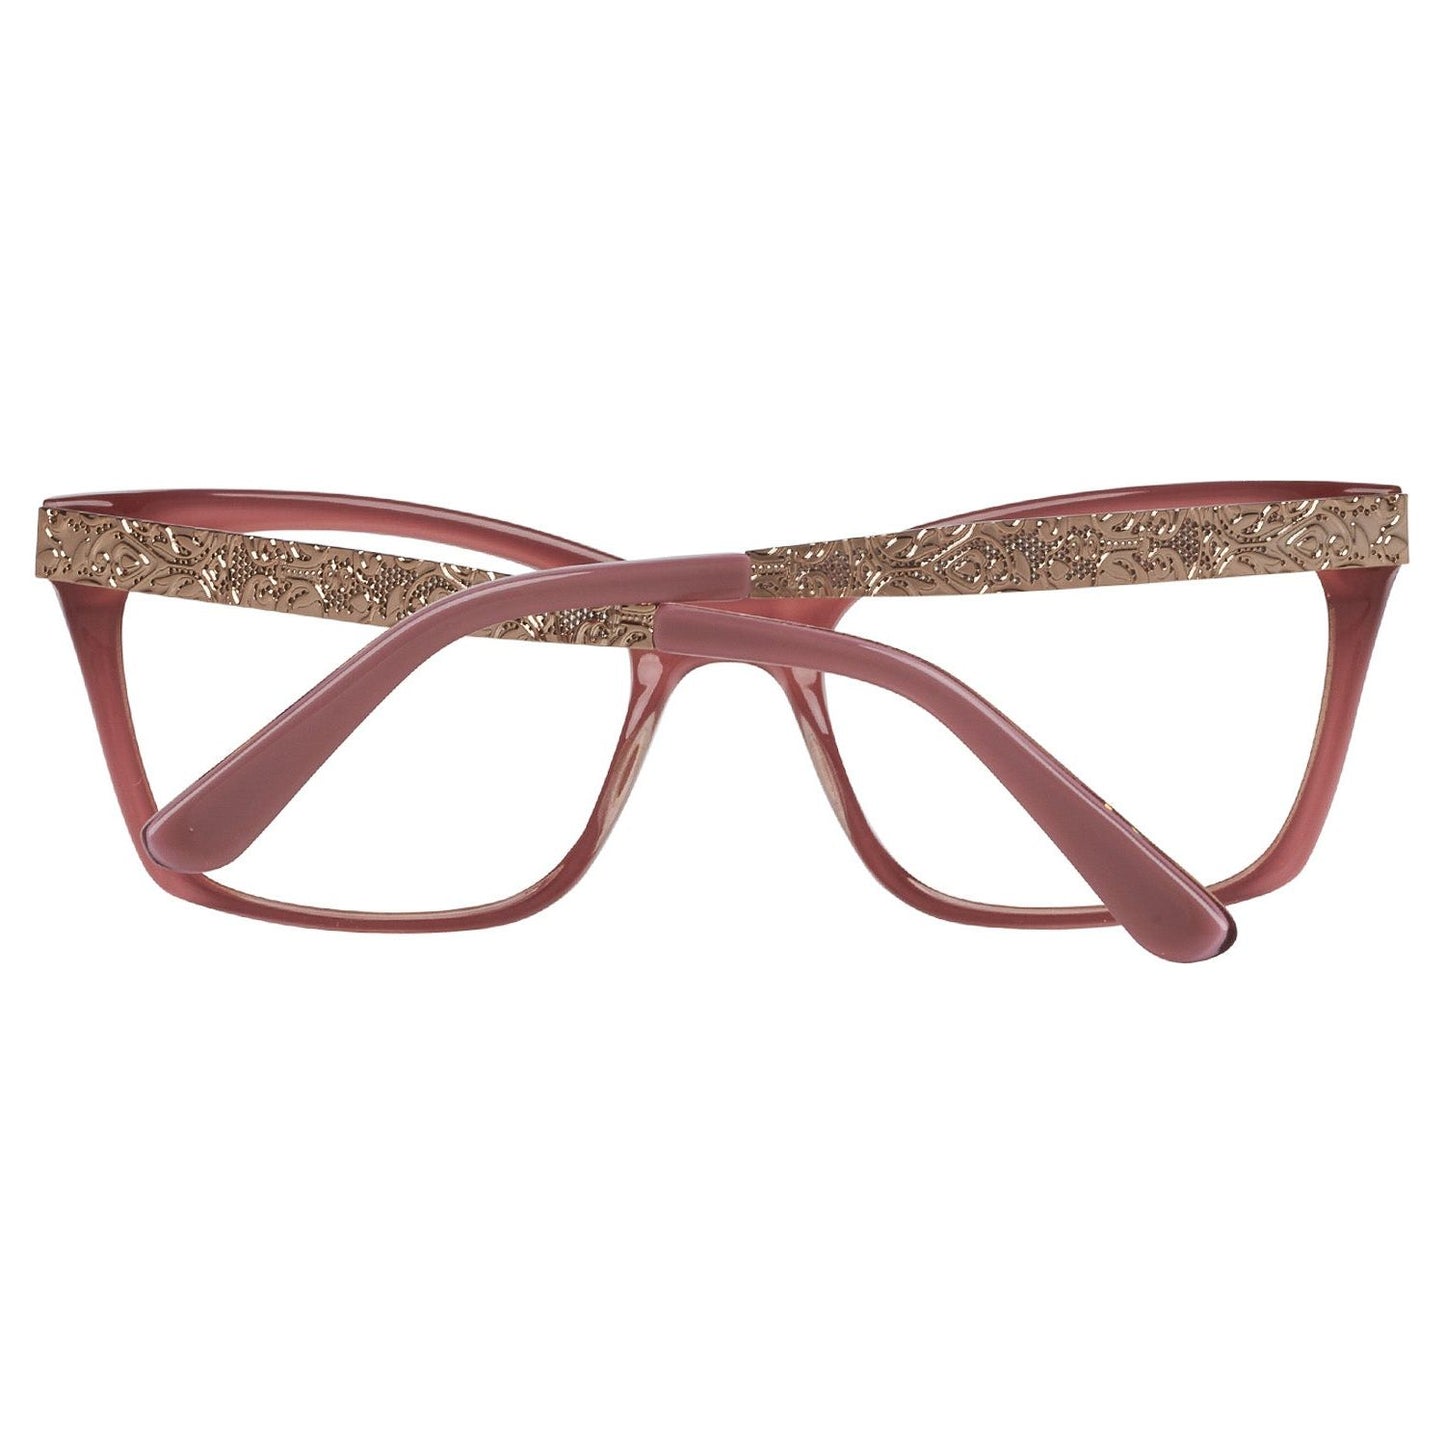 MARCIANO By GUESS EYEWEARMARCIANO BY GUESS MOD. GM0267 53072McRichard Designer Brands£106.00